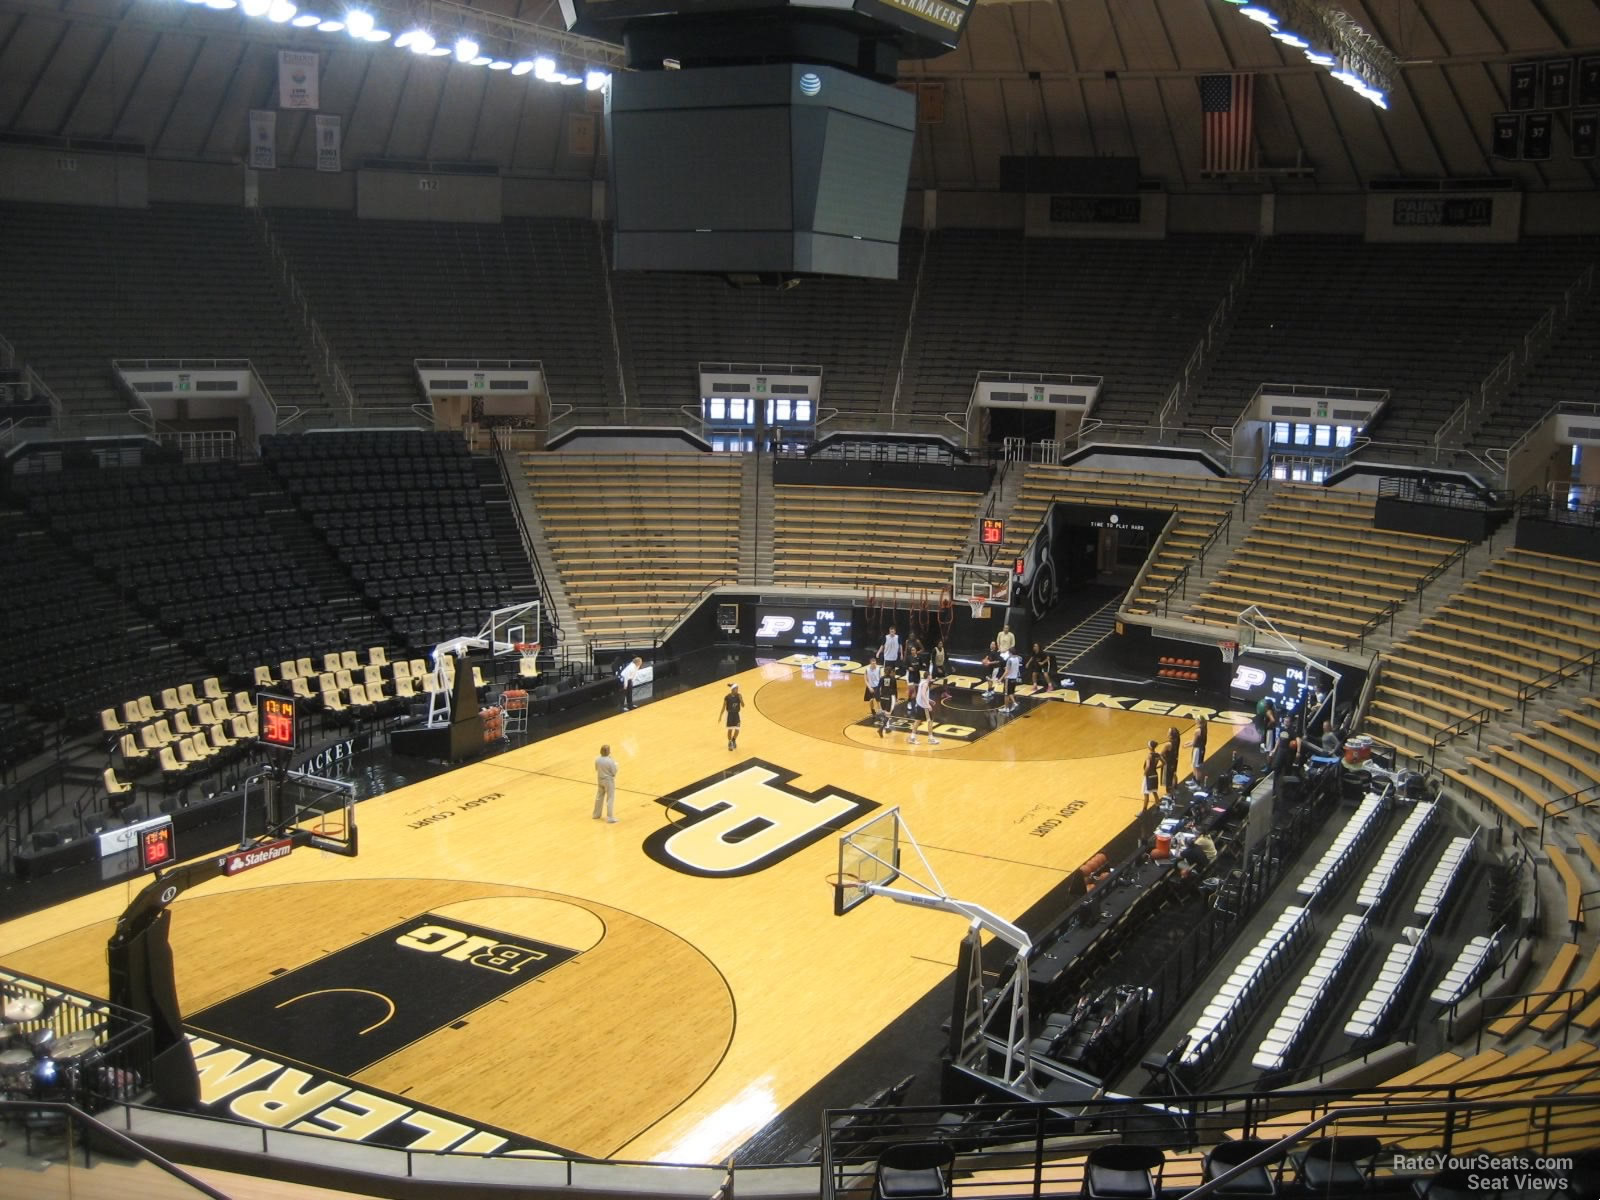 section 105, row 10 seat view  - mackey arena